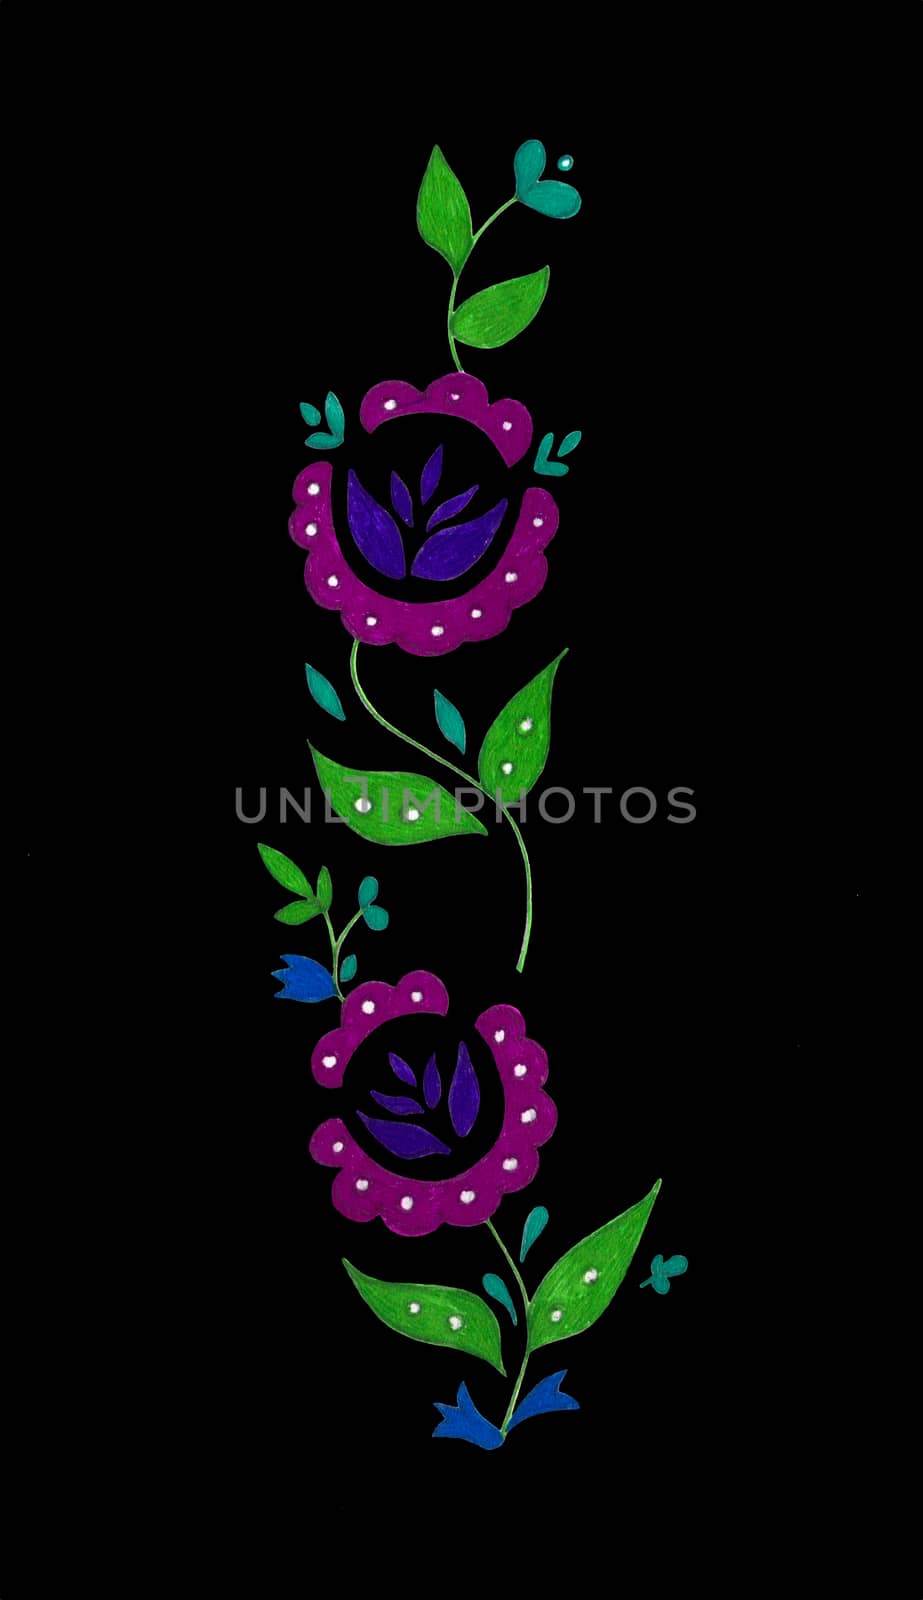 Decorative composition of abstract doodle flowers and leaves. Floral motif illustration. Design element. Hand drawn vertical ornament isolated on black background